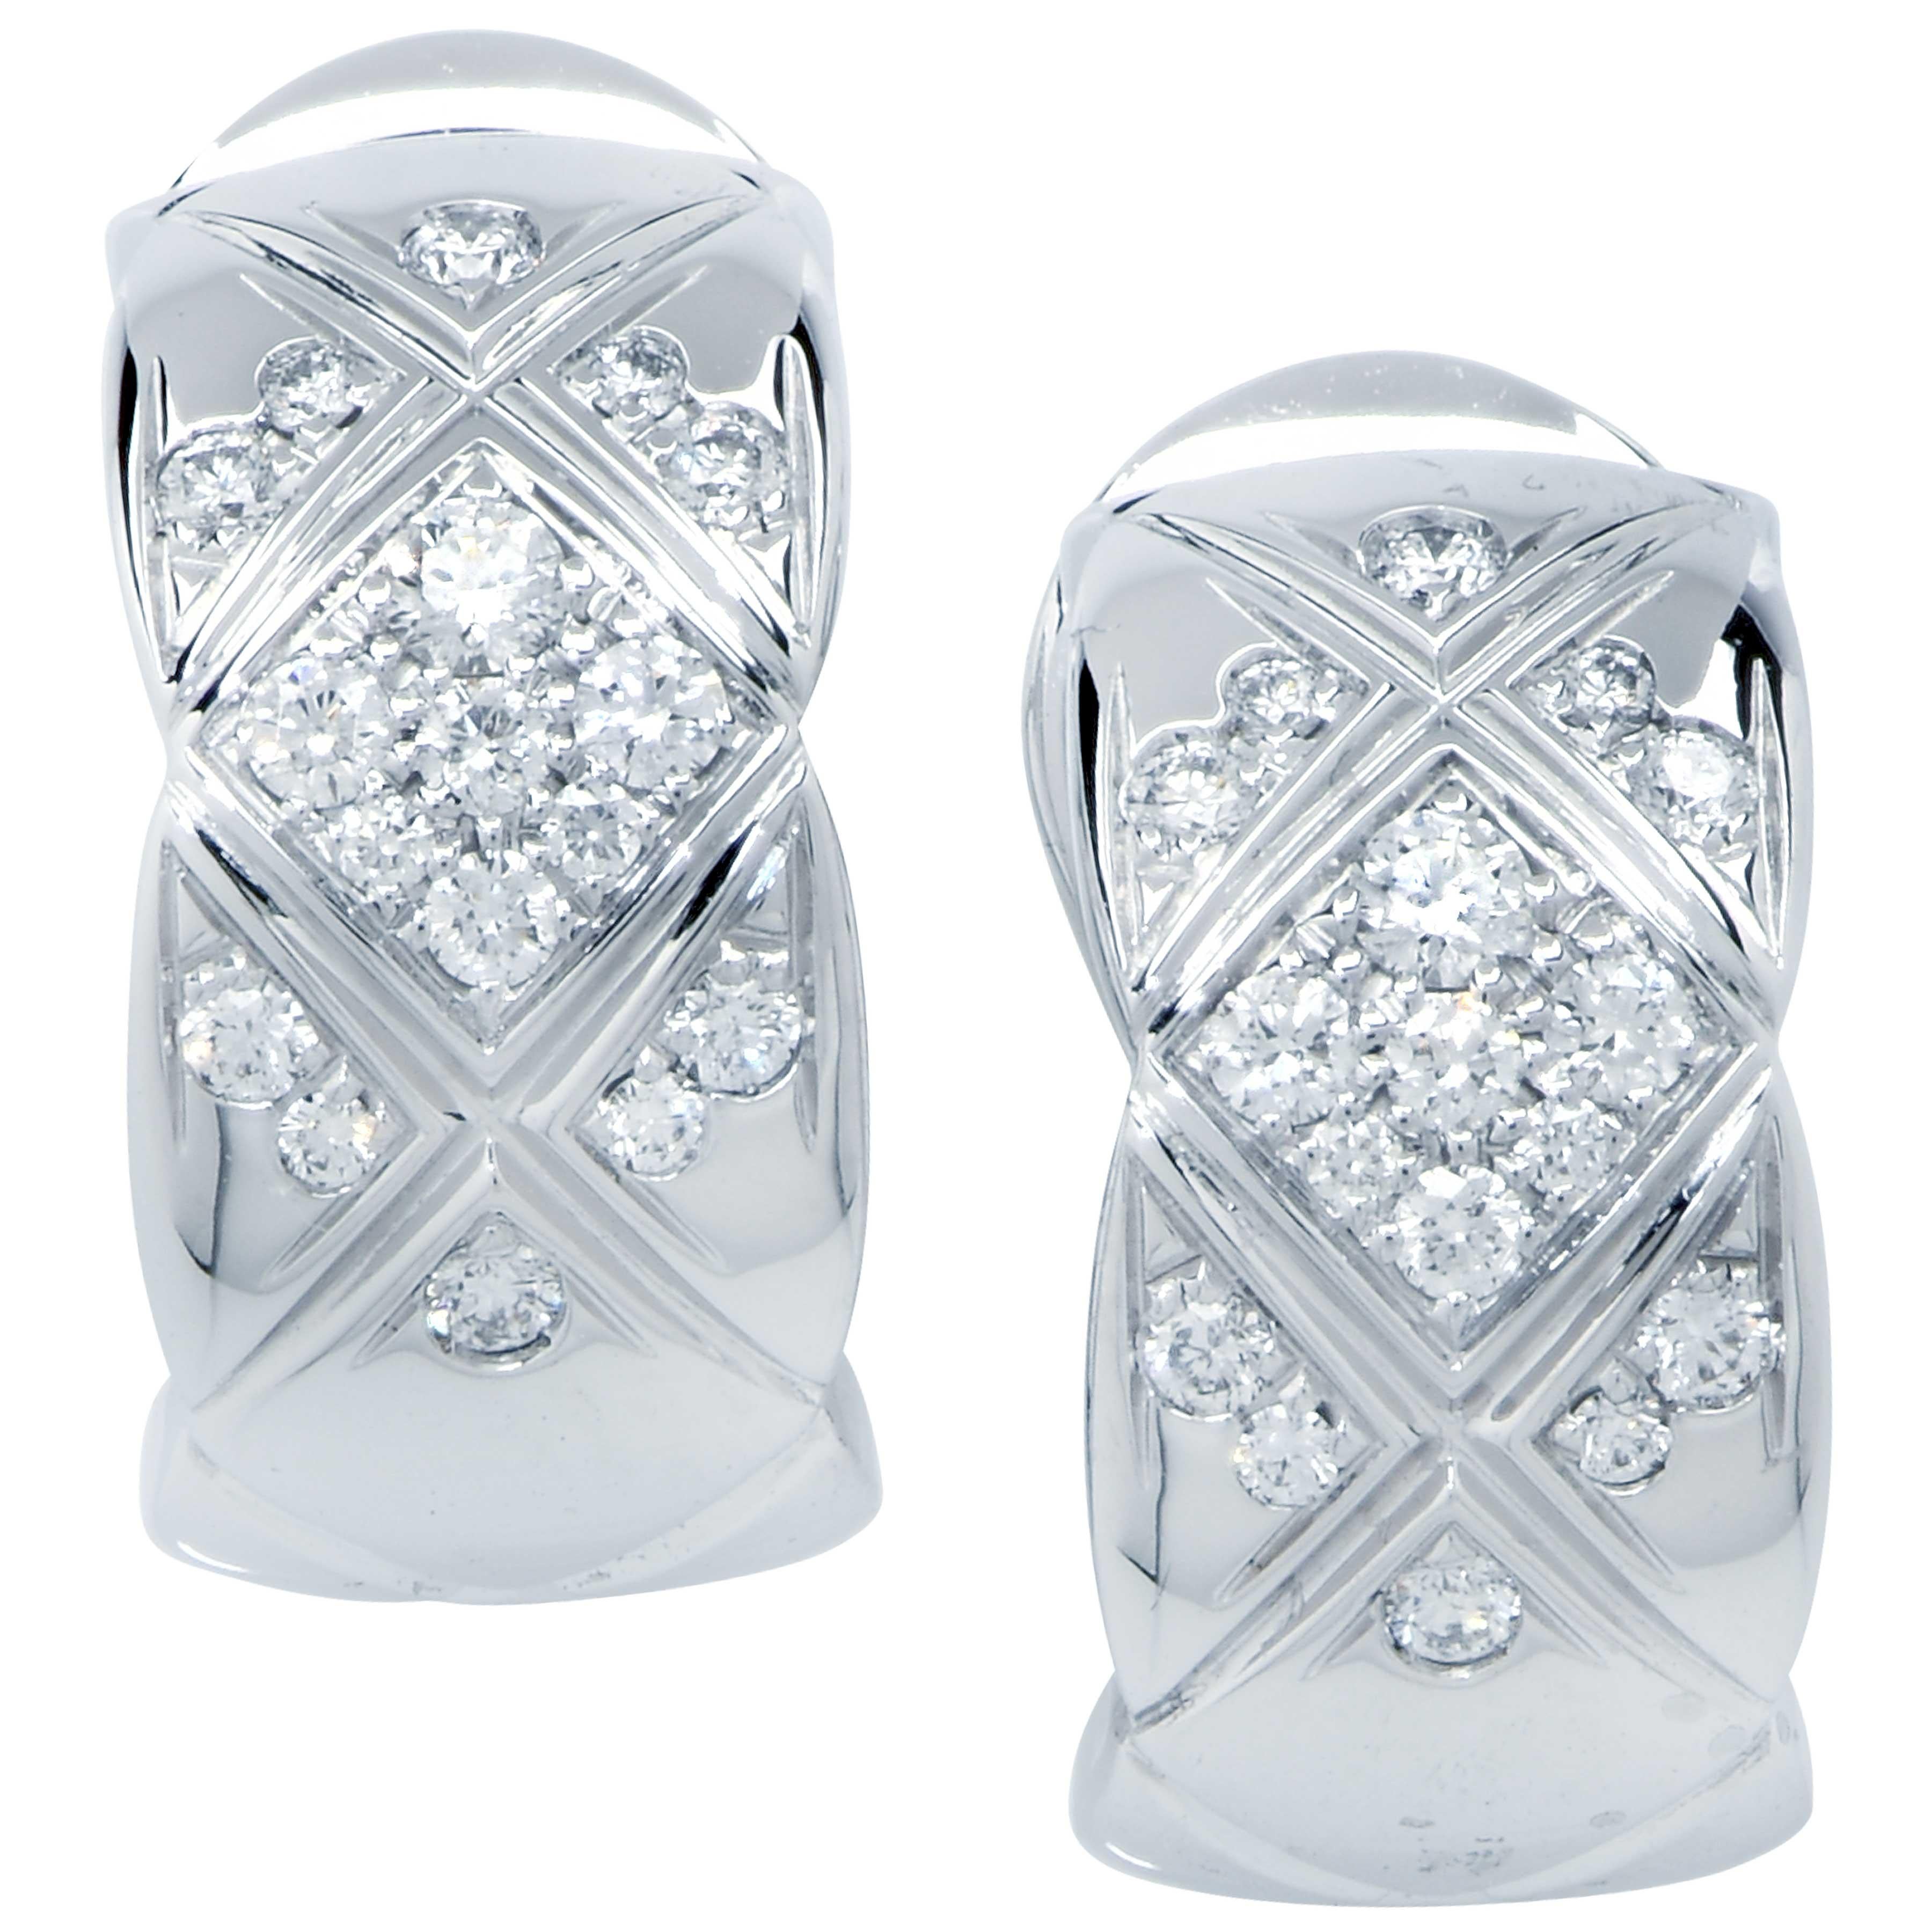 Chanel Coco Crush Diamond and 18 Karat White Gold Earrings 
These wonderful earrings are adorned by 26 round brilliant cut diamonds.
Metal Weight: 6 Grams
Current retail price $5,700.00